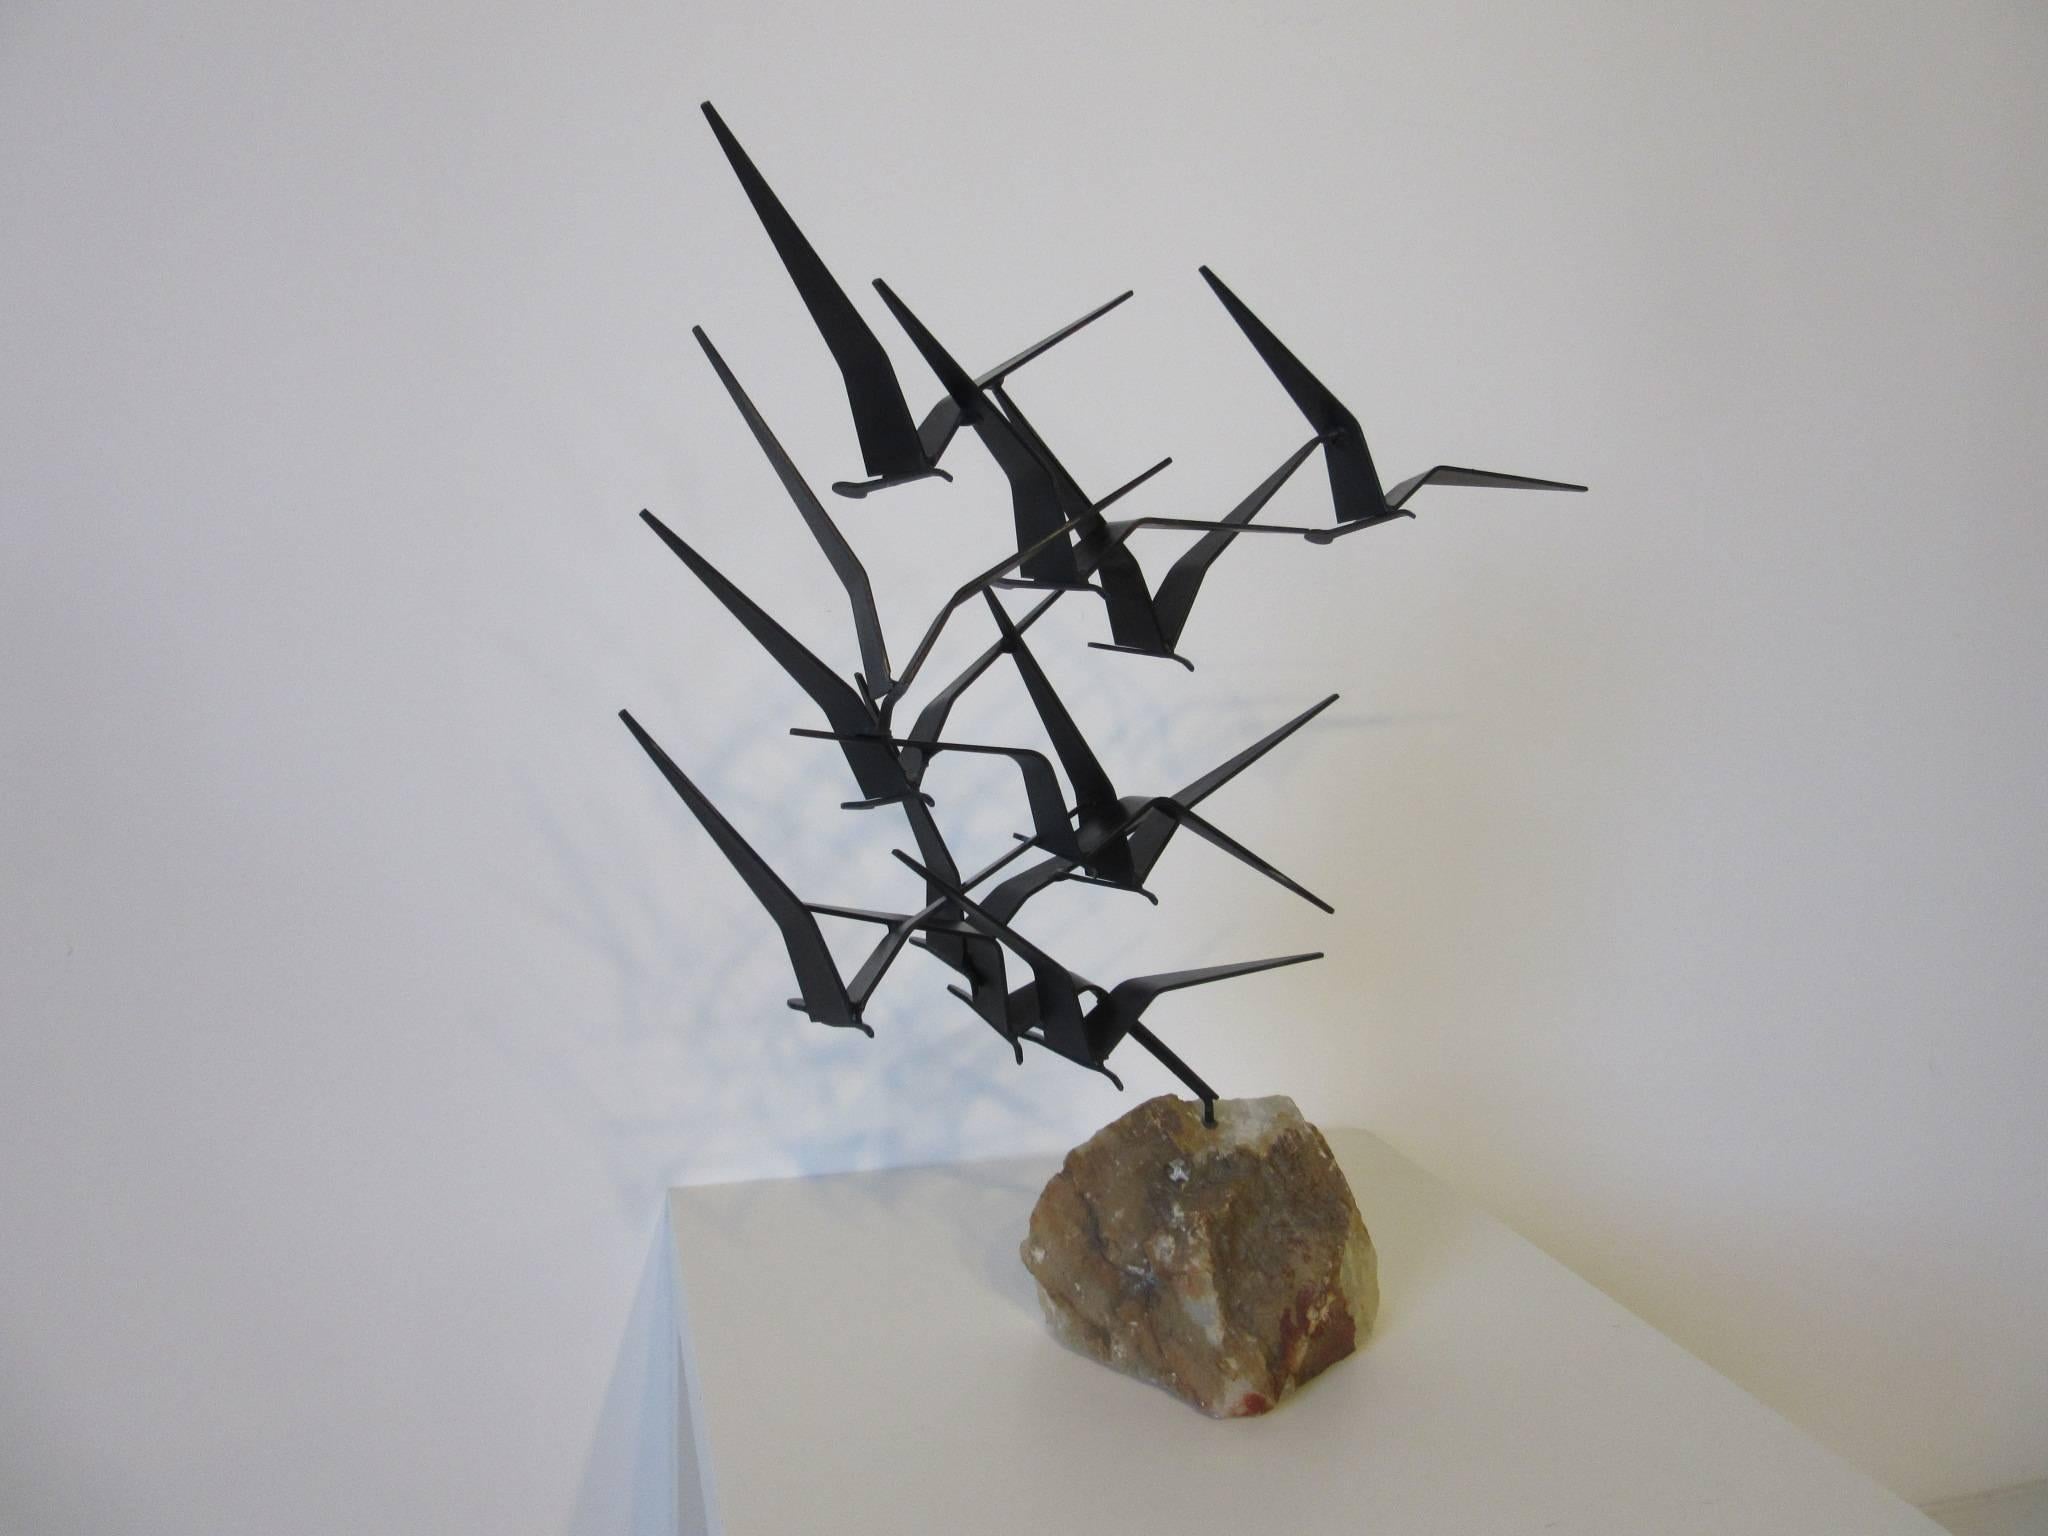 A welded metal flock of birds sculpture mounted on a natural quartz type stone with shades of brown tones, the birds are in a flat black finish and retain the artist signature and date to the wing of one. The sculpture is in two pieces the birds can